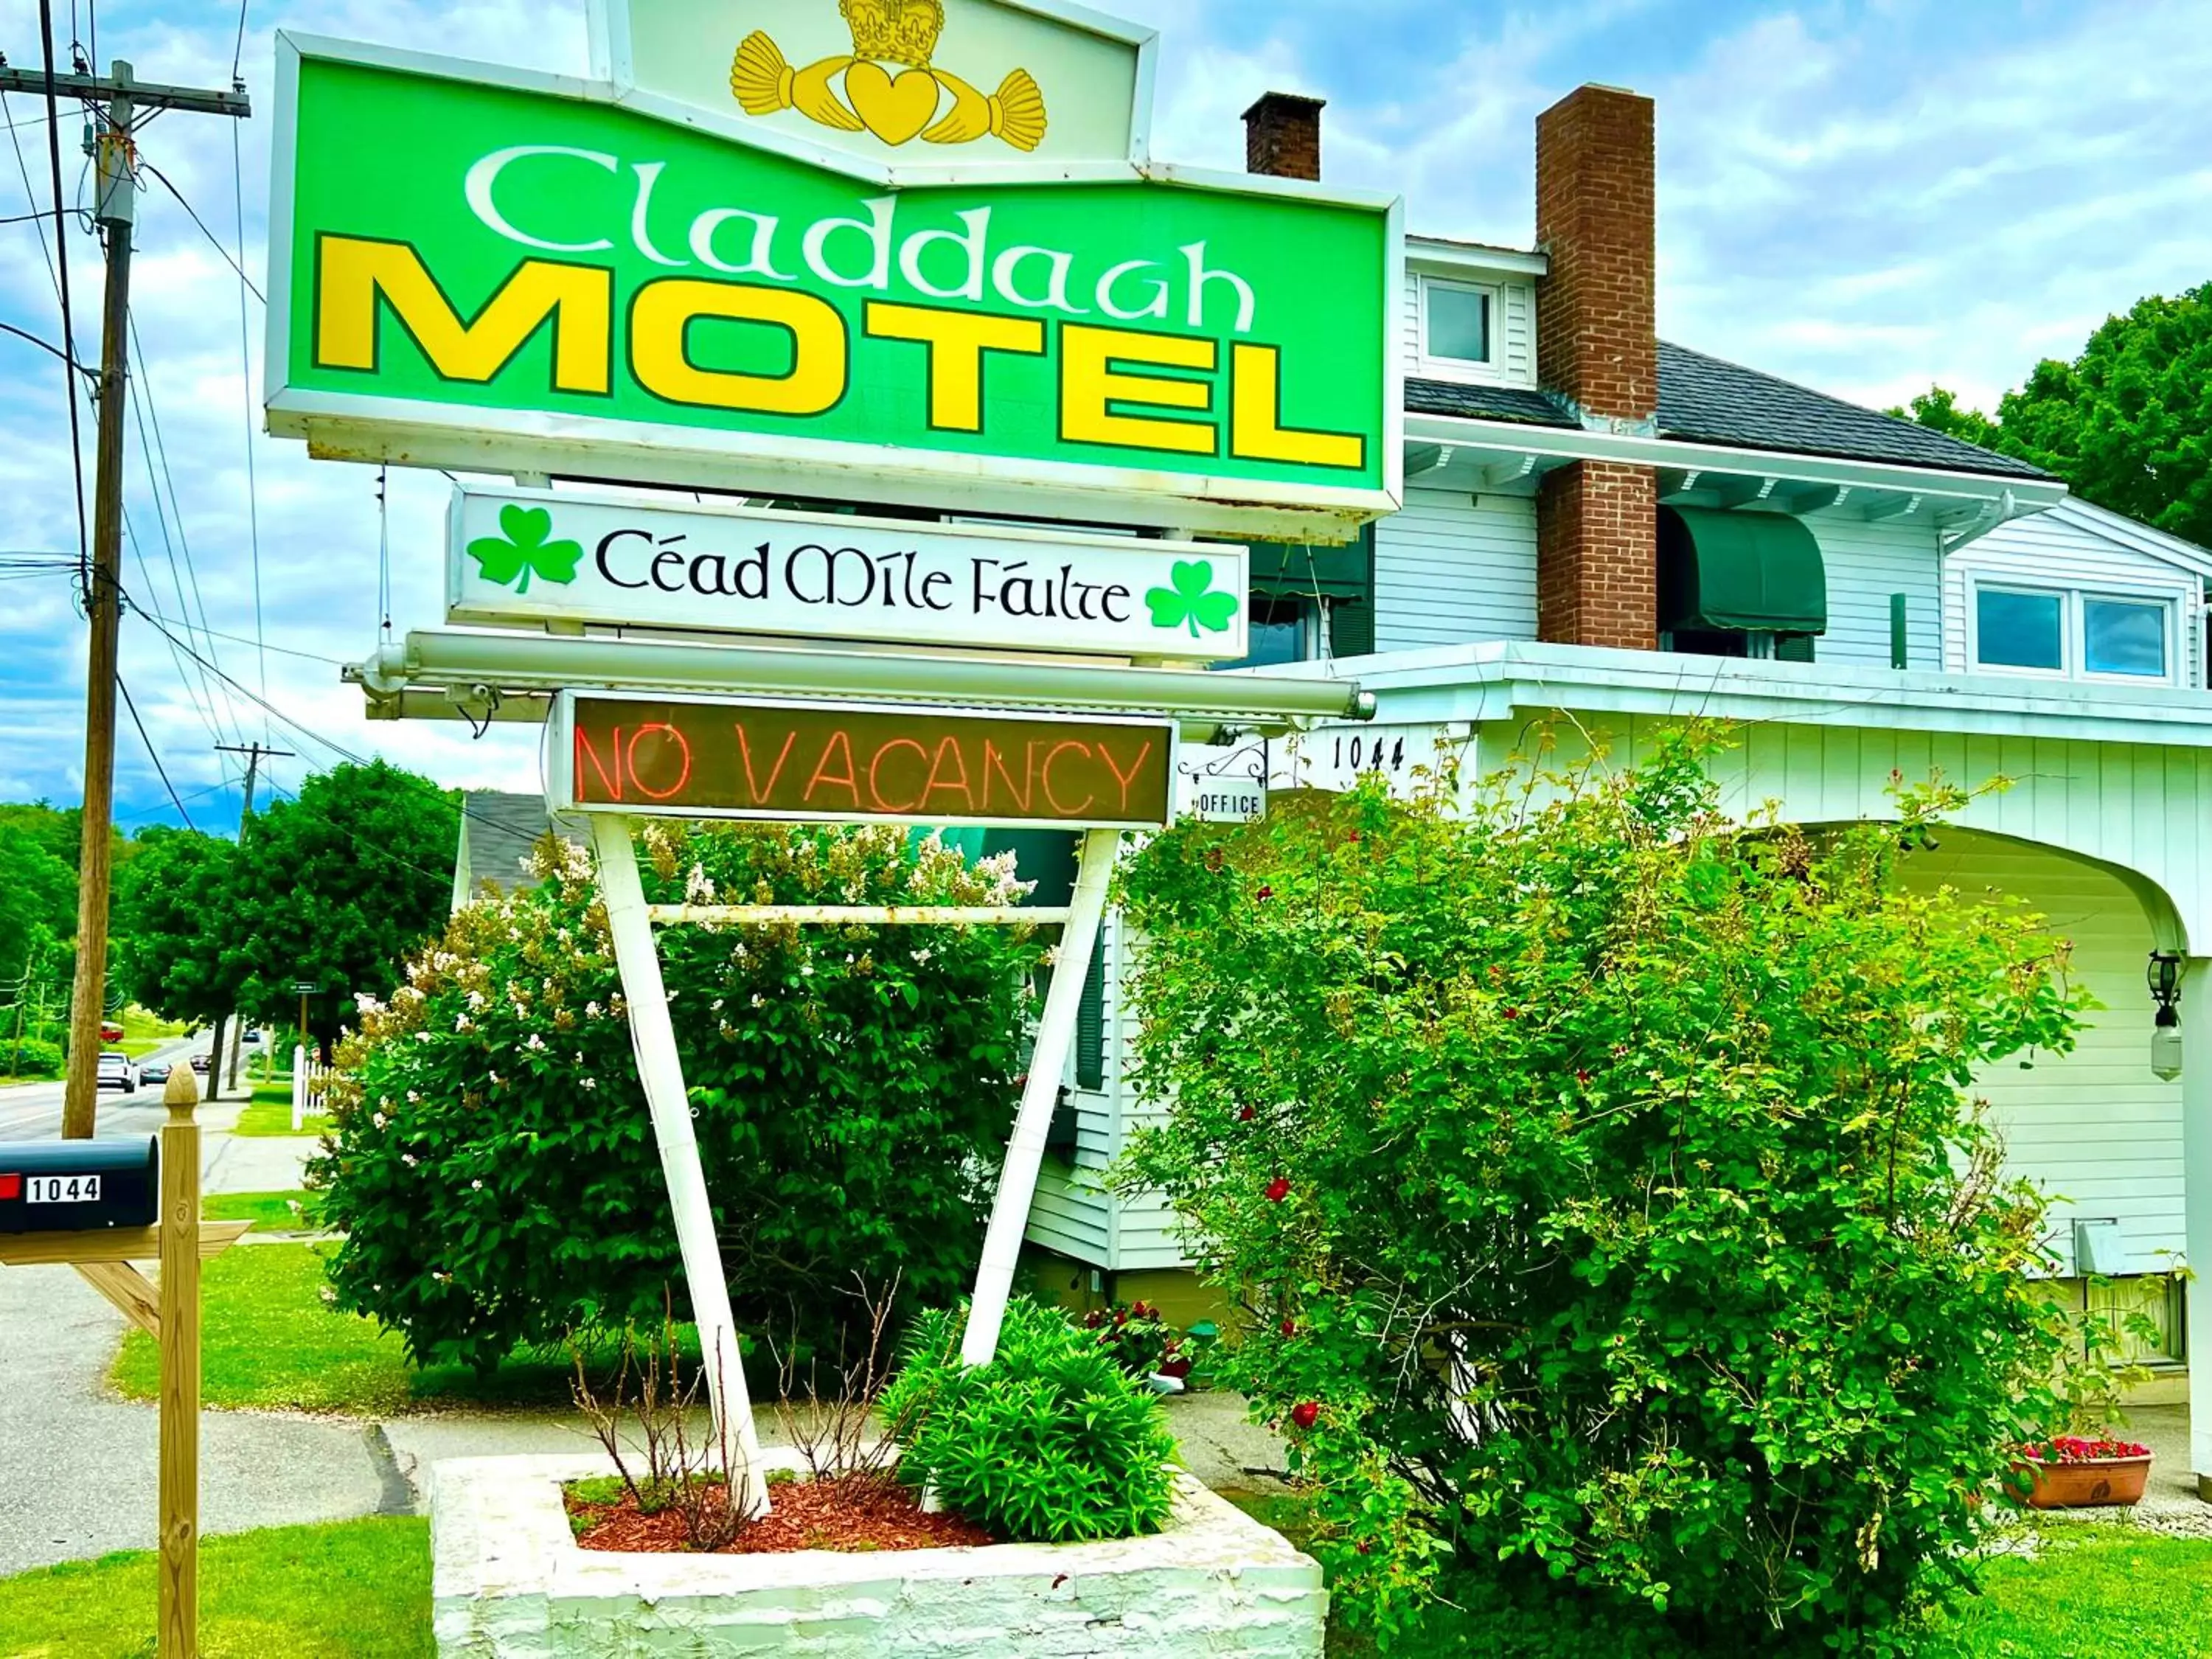 Property Building in Claddagh Motel & Suites